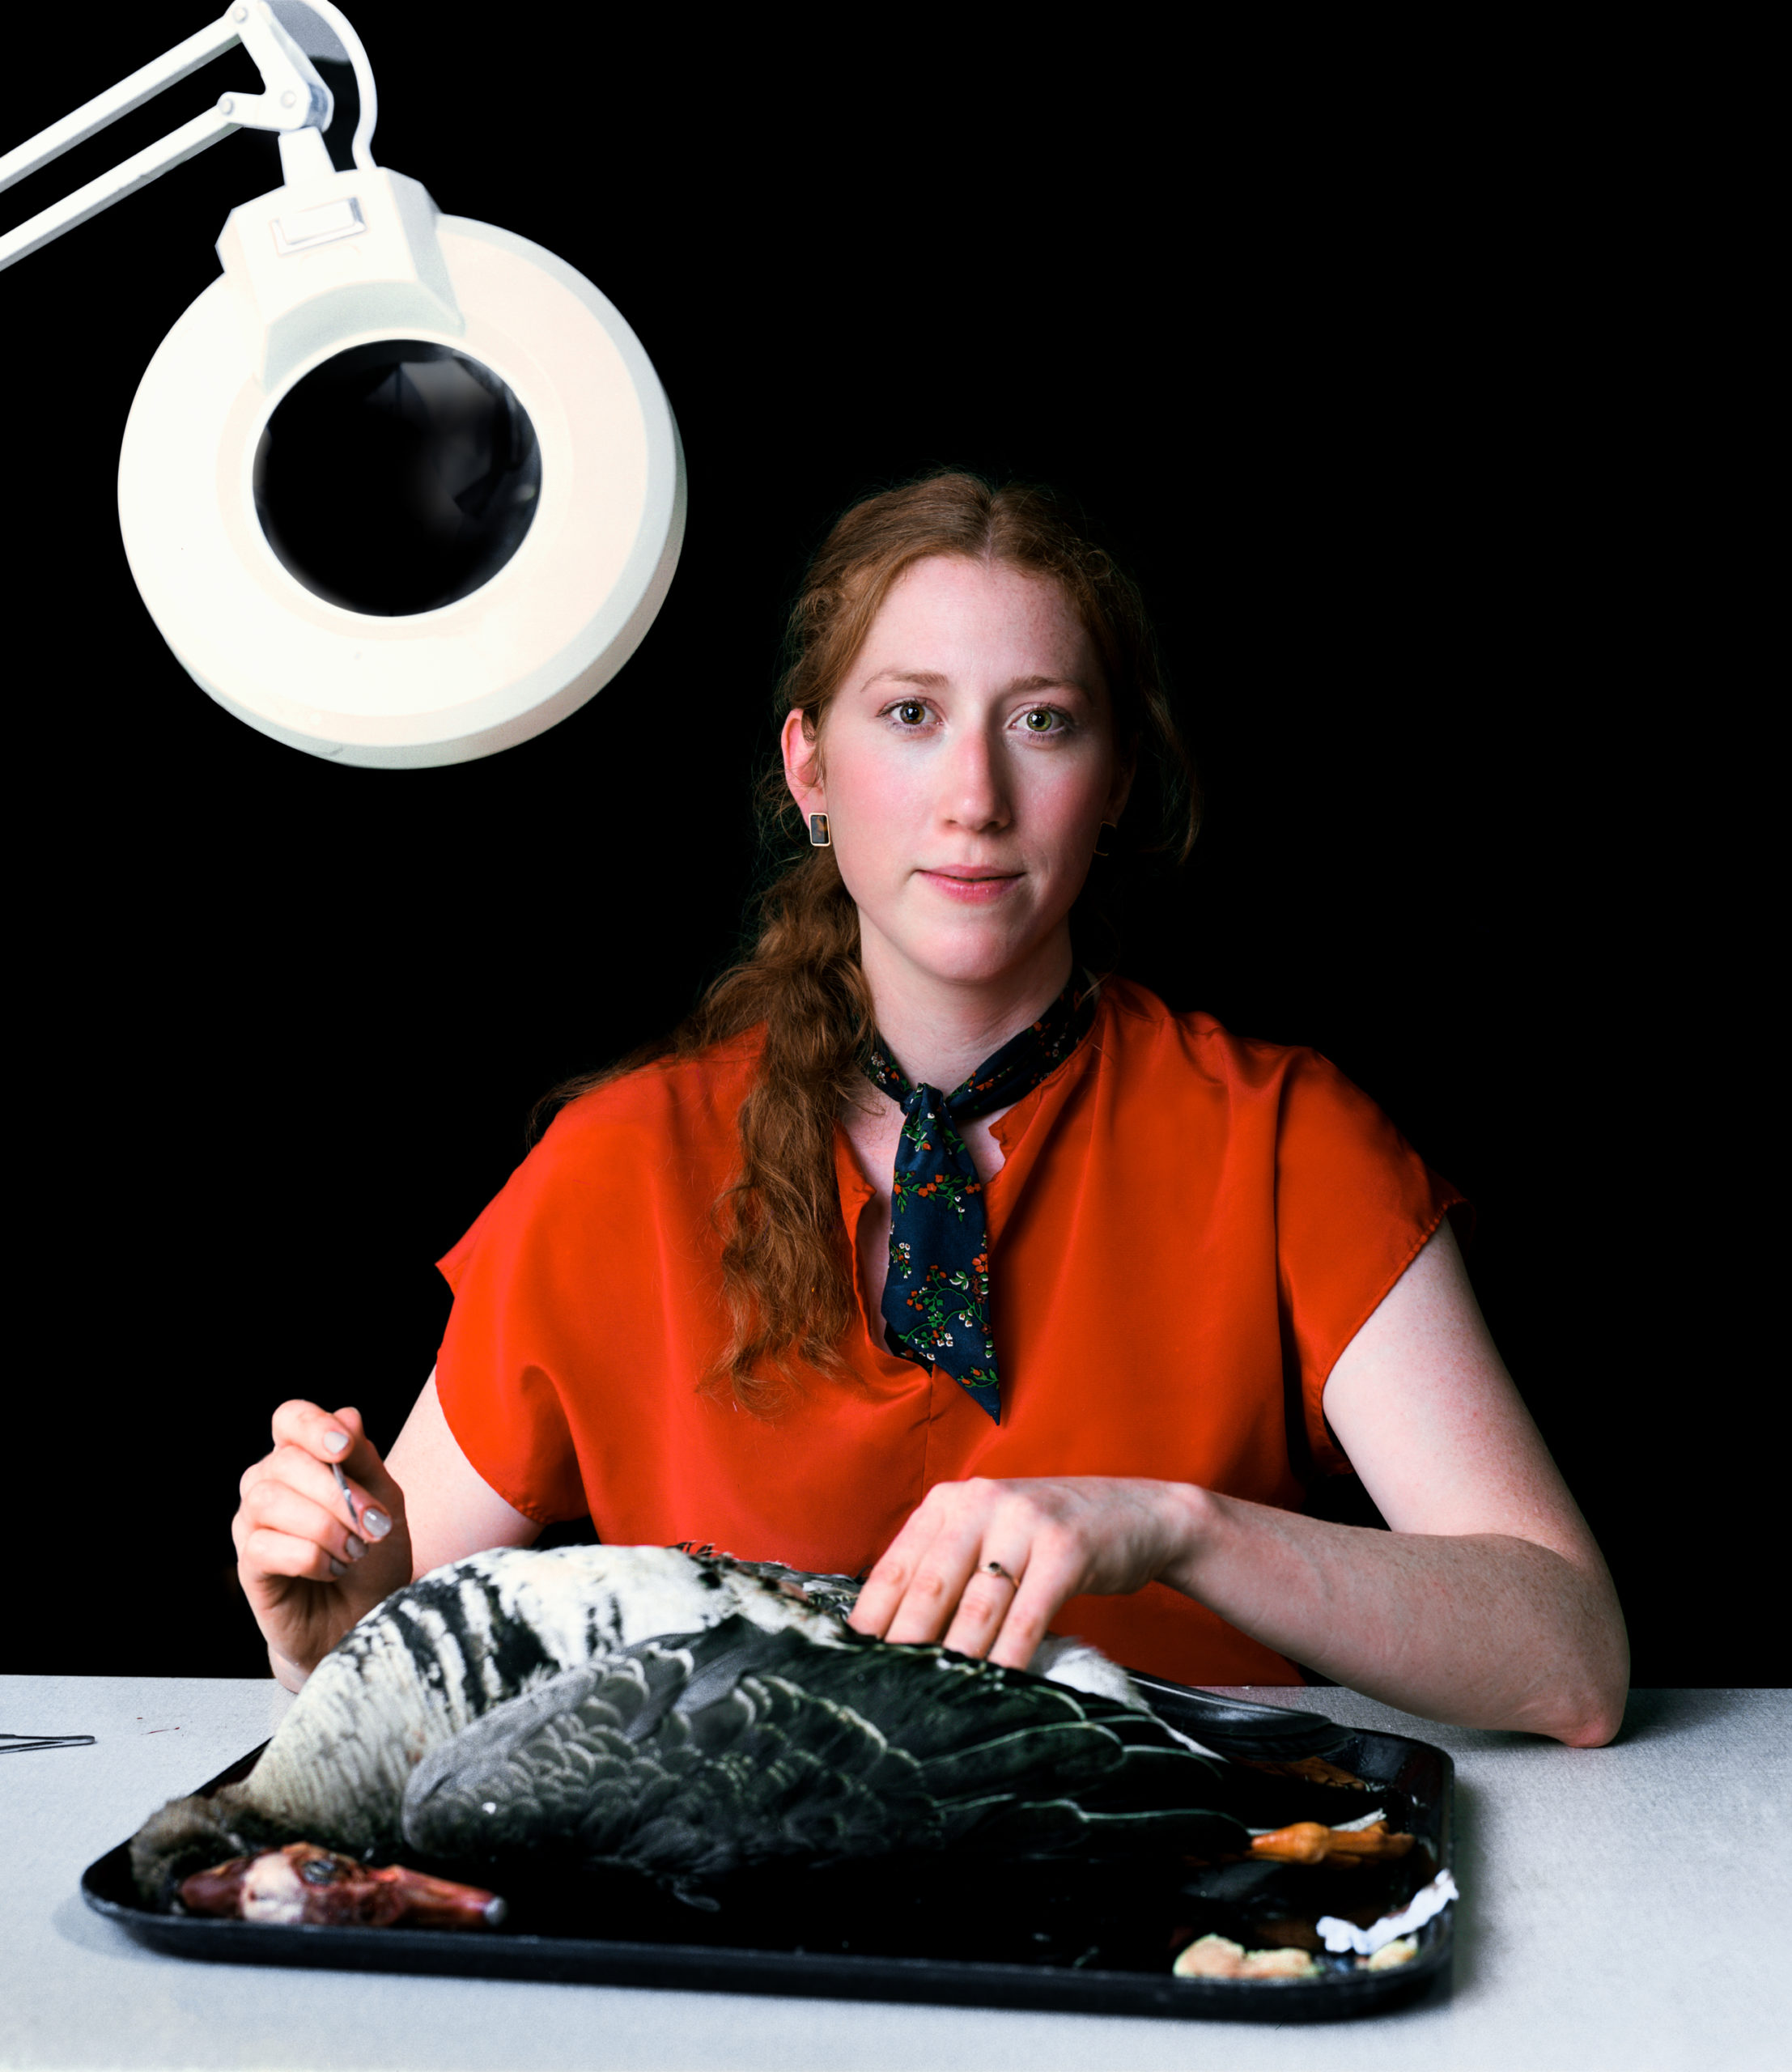 Portrait of a women in a red shirt operating on a bird for taxidermy